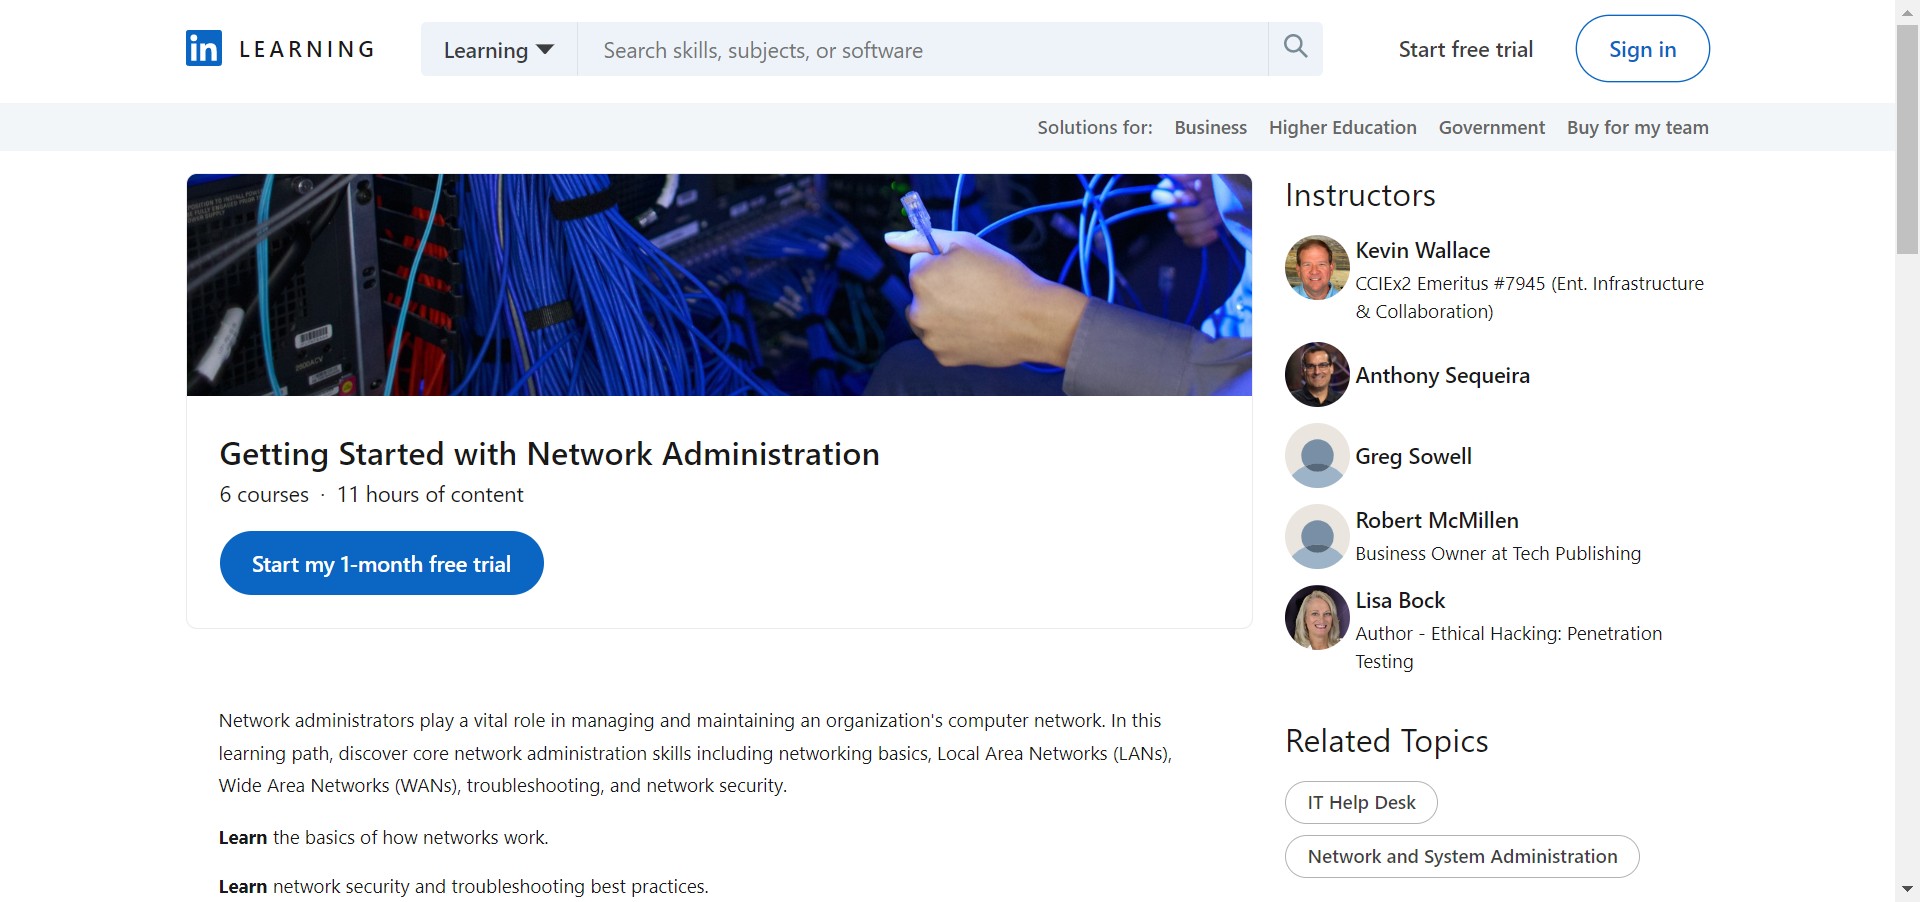 Getting Started with Network Administration